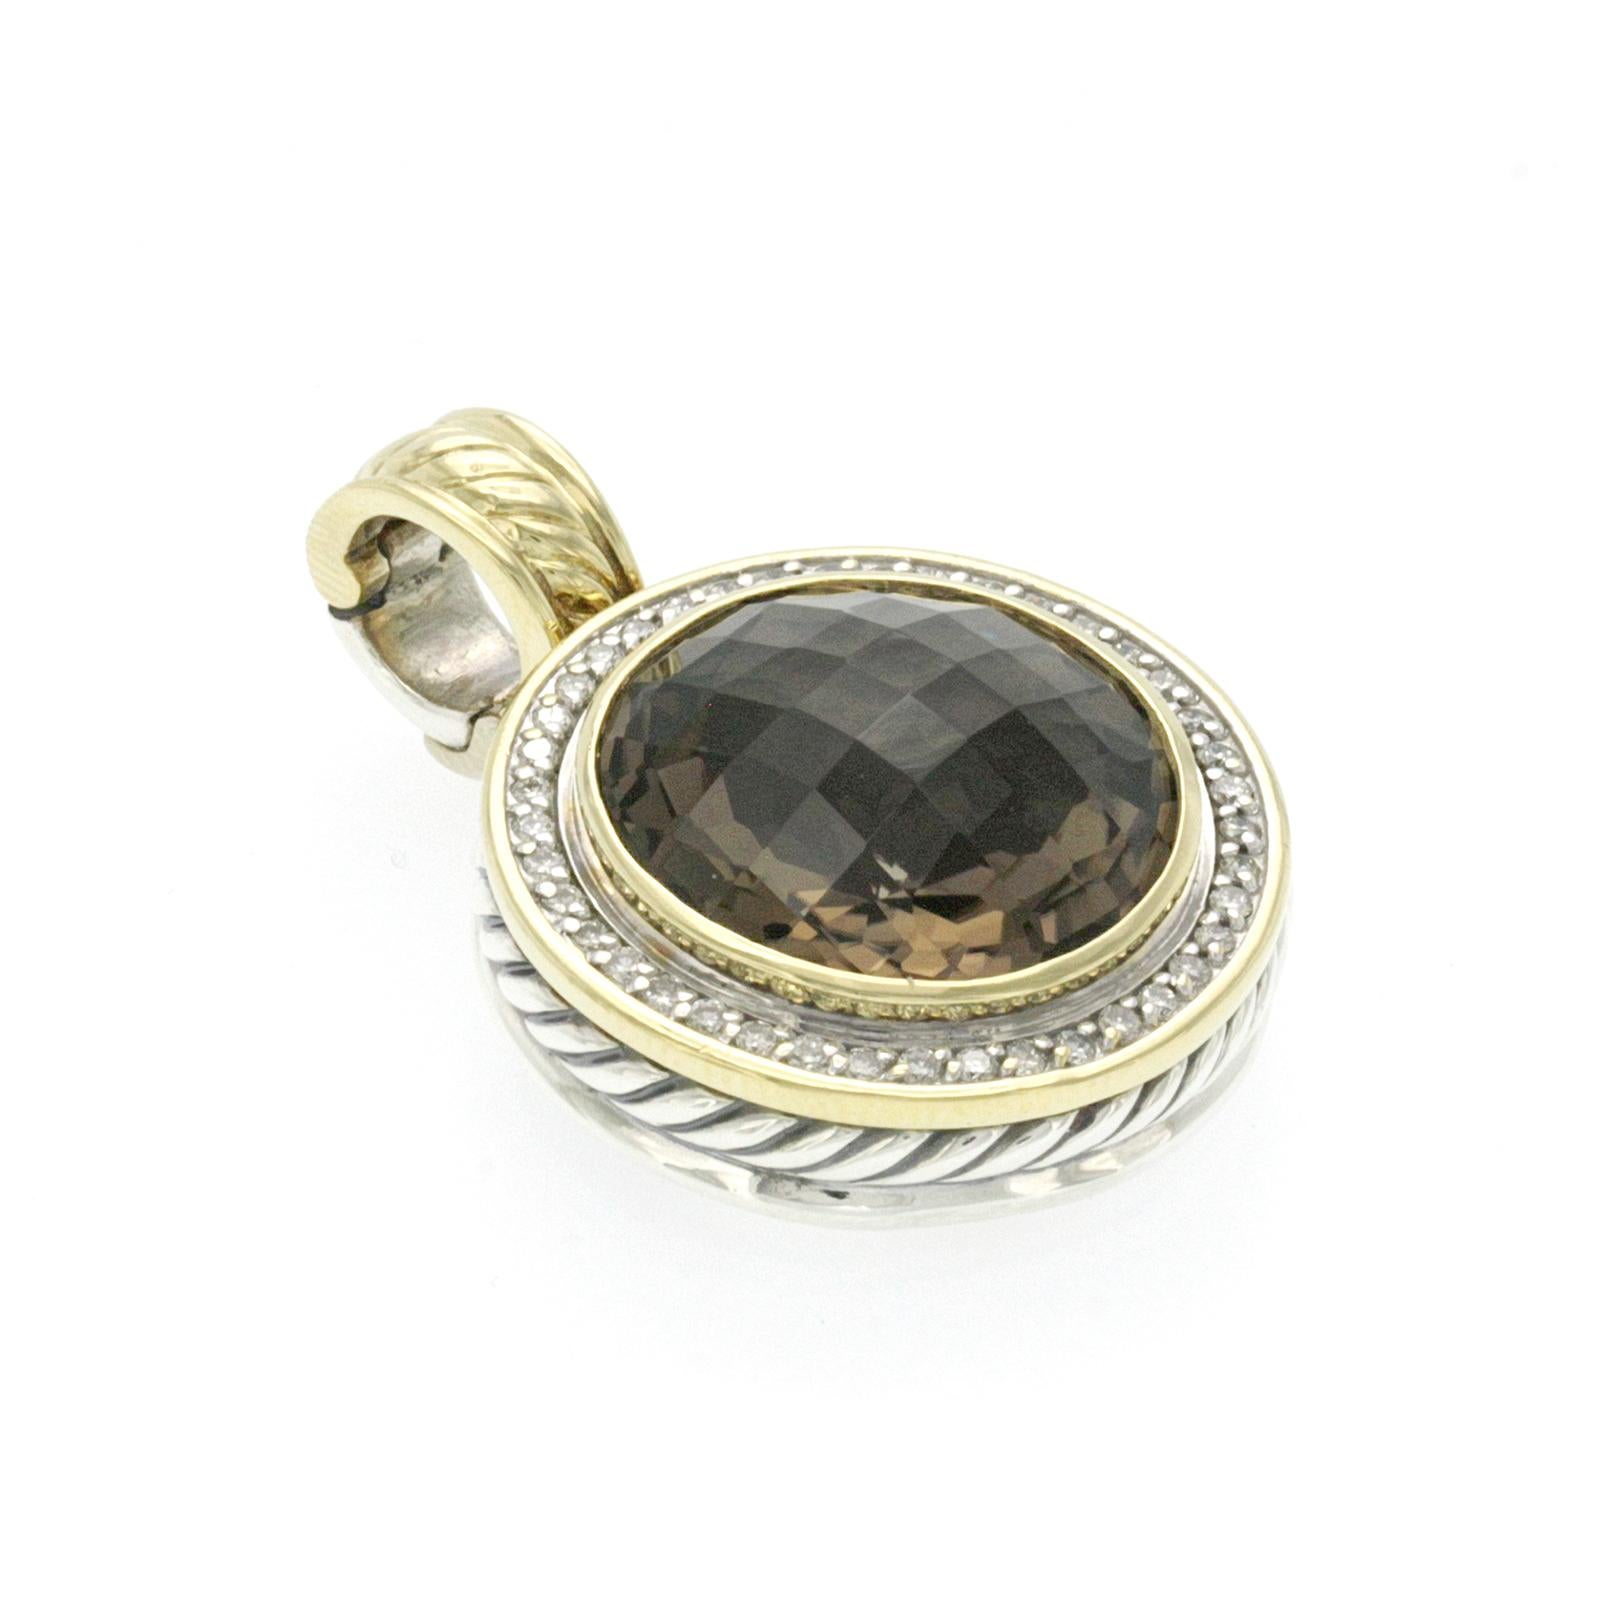 100% Authentic, 100% Customer Satisfaction

Height: 36 mm

Width: 26 mm

Metal: 925 Sterling Silver & 18K Yellow Gold 

Hallmarks: DY 925 750

Total Weight: 20.8 Grams

Stone: Smoky Quartz & Diamonds

Condition: PreOwned

Estimated Retail Price: